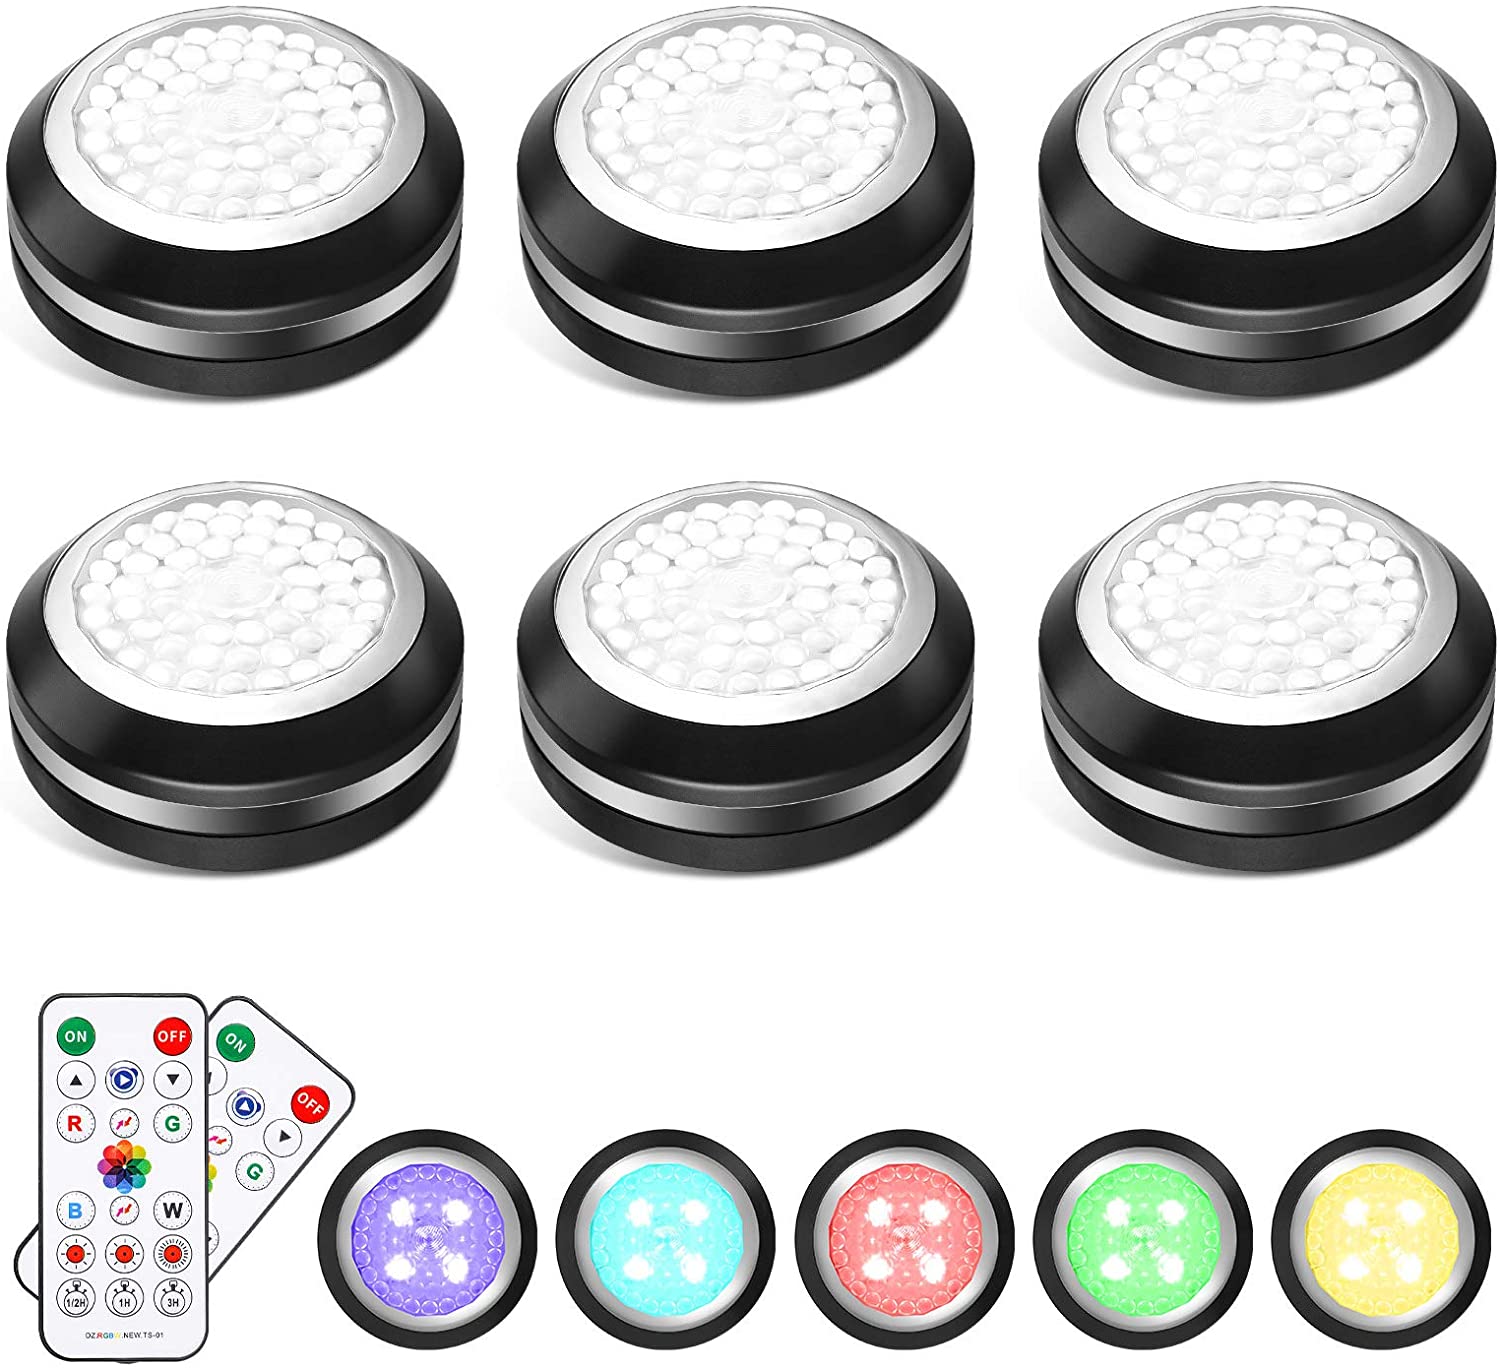 Elfeland-6PCS-DC-45V-RGB-3800-4000K-4-Modes-Touch-Round-Cabinet-Light-with-2PCS-Remote-Controller-fo-1884922-1